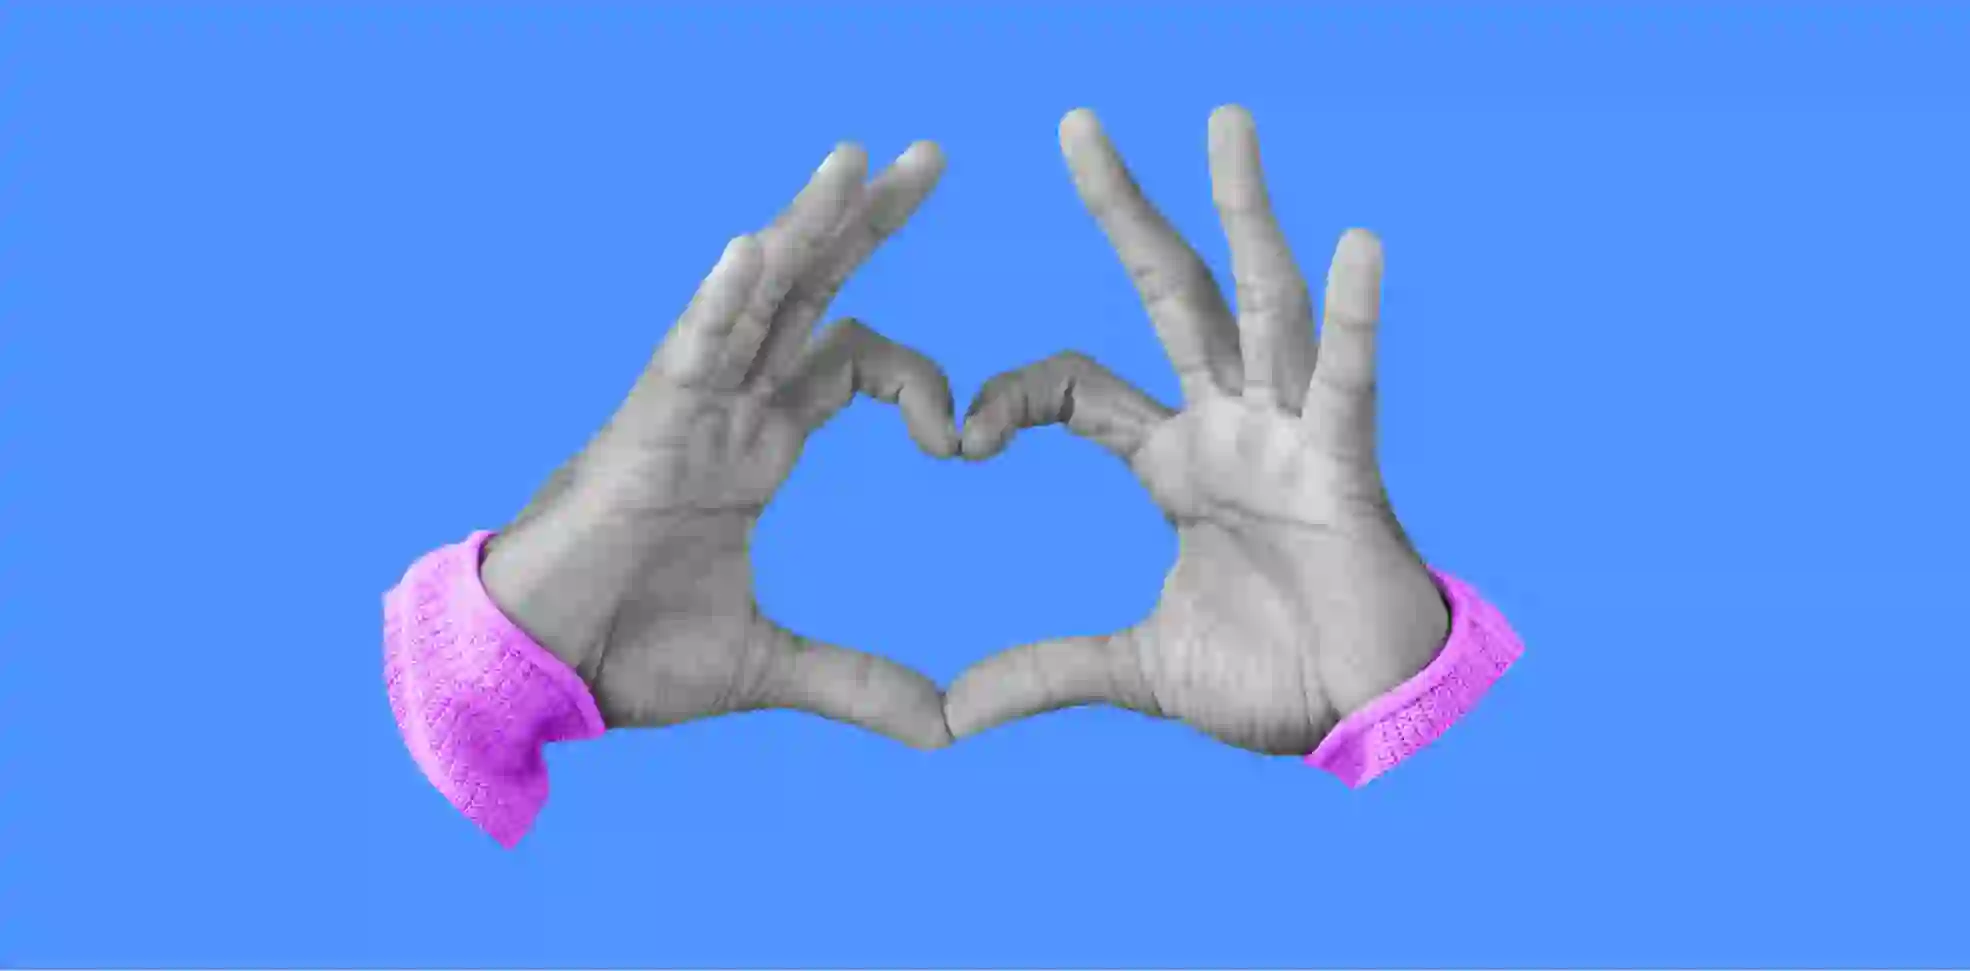 two hands on the blue background